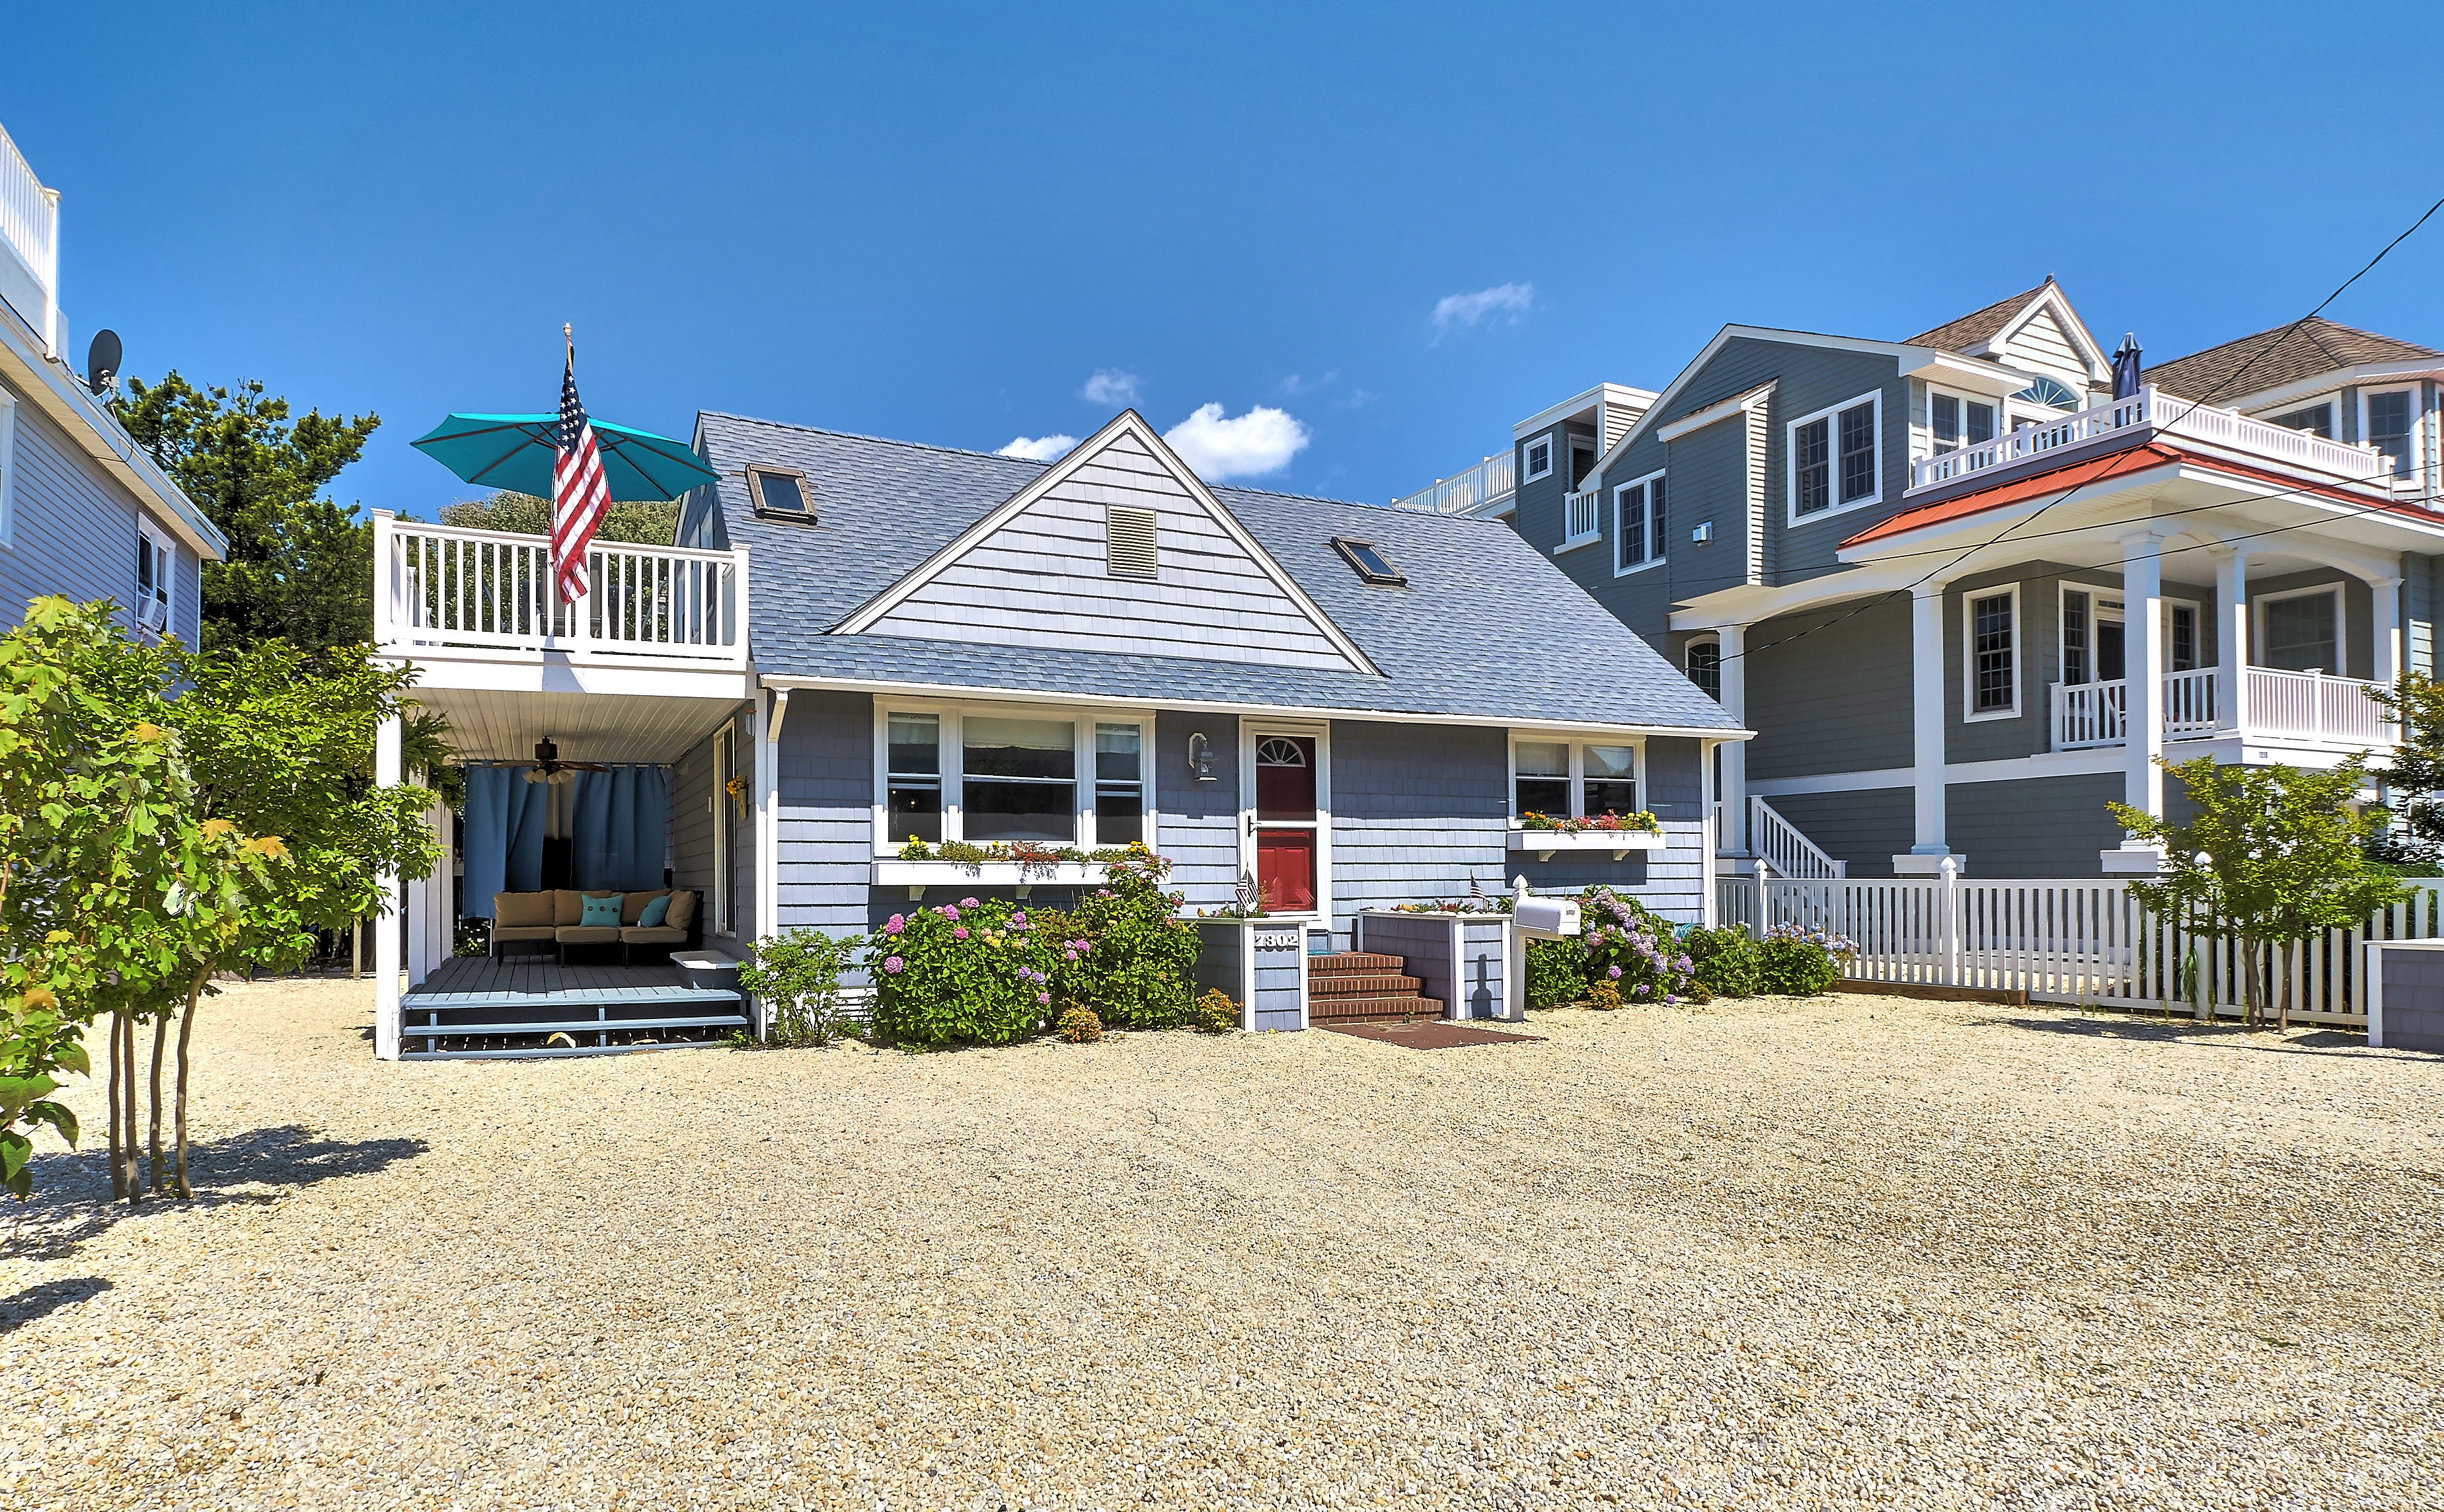 SOLD|Long Beach Island Home for Sale|LBI Real Estate|Je